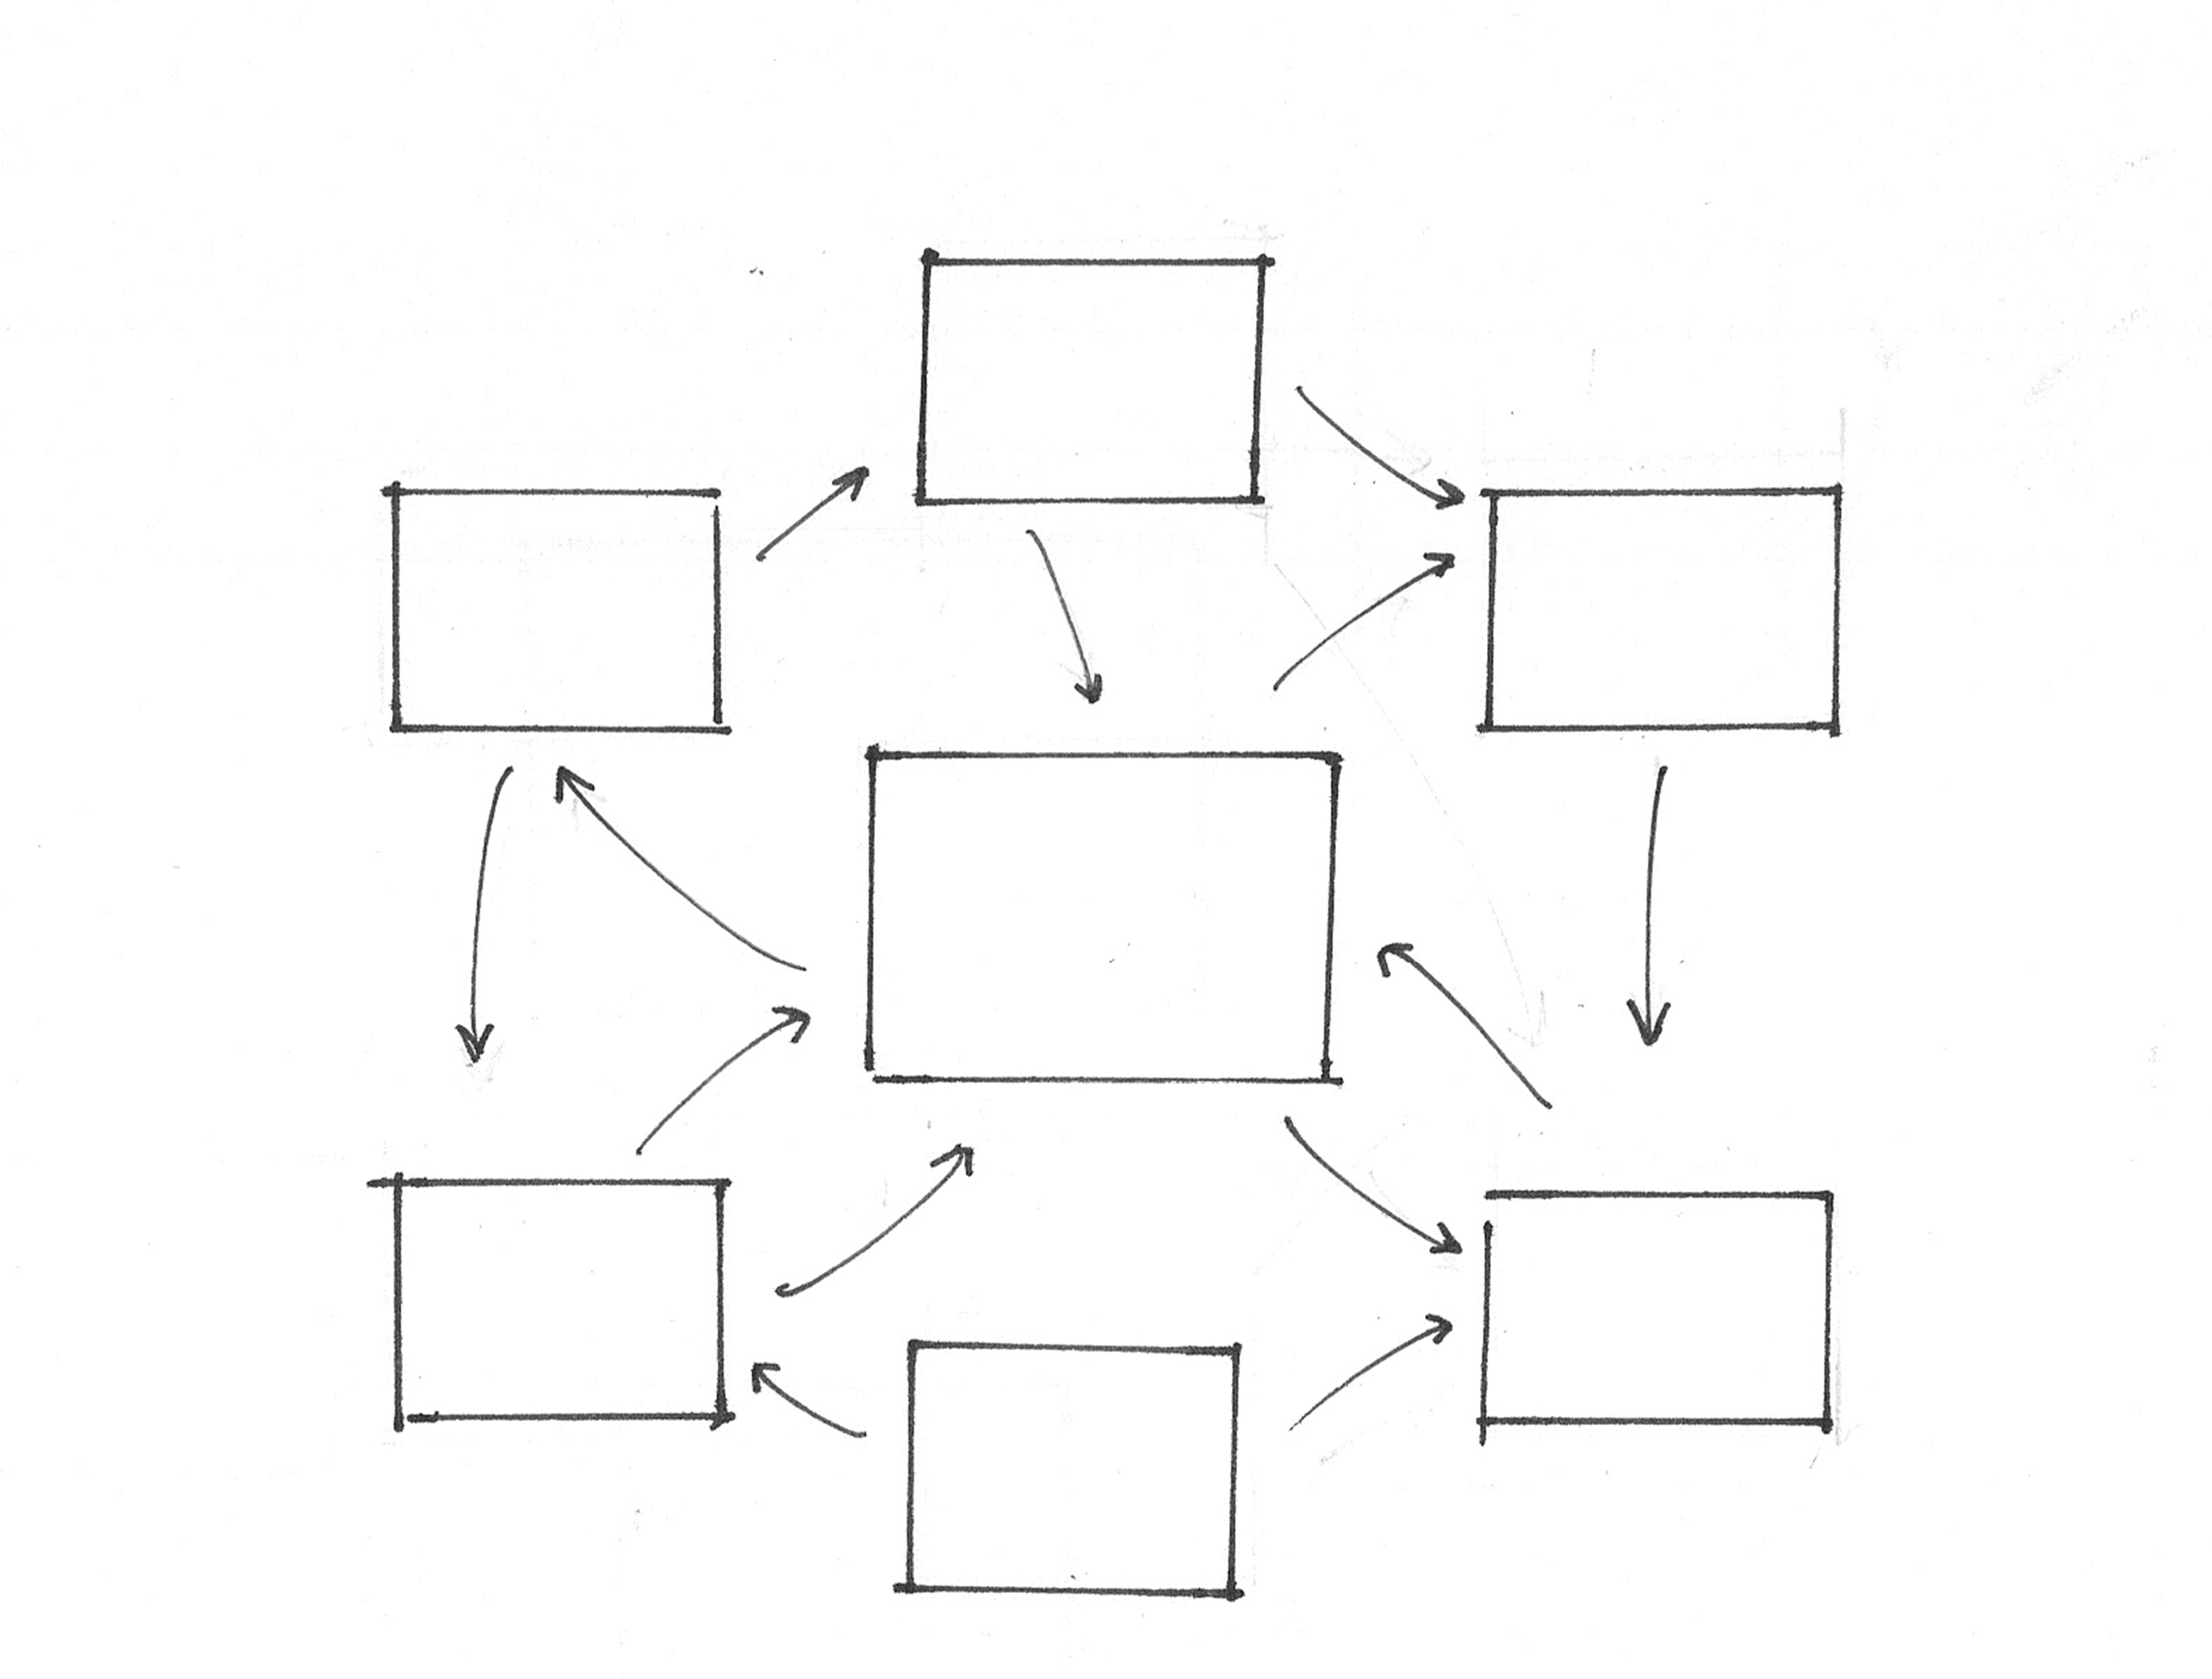 Example of using basic boxes and lines to draw visualize an ecosystem or network